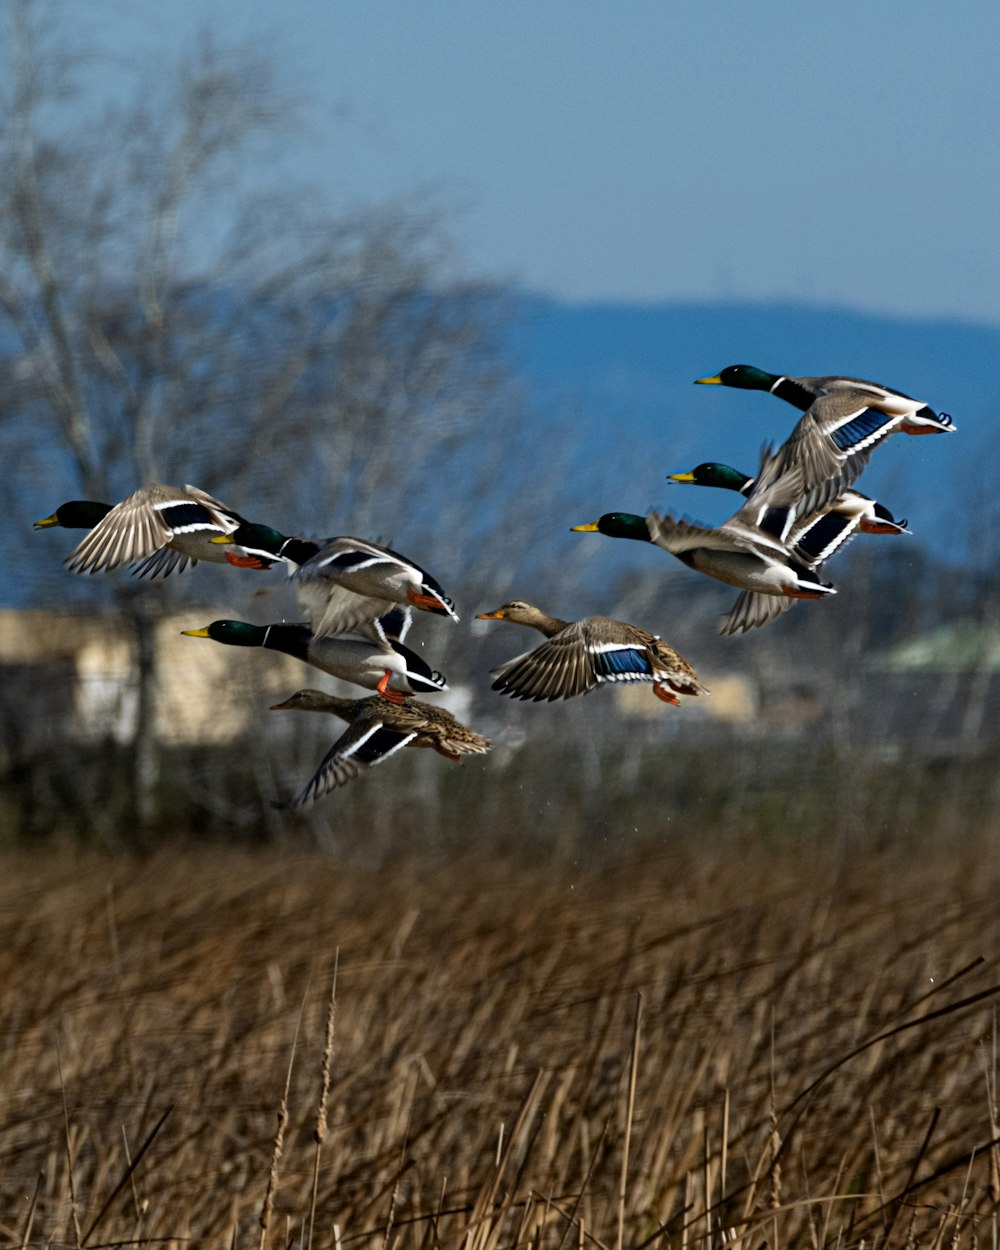 a flock of ducks flying over a dry grass field